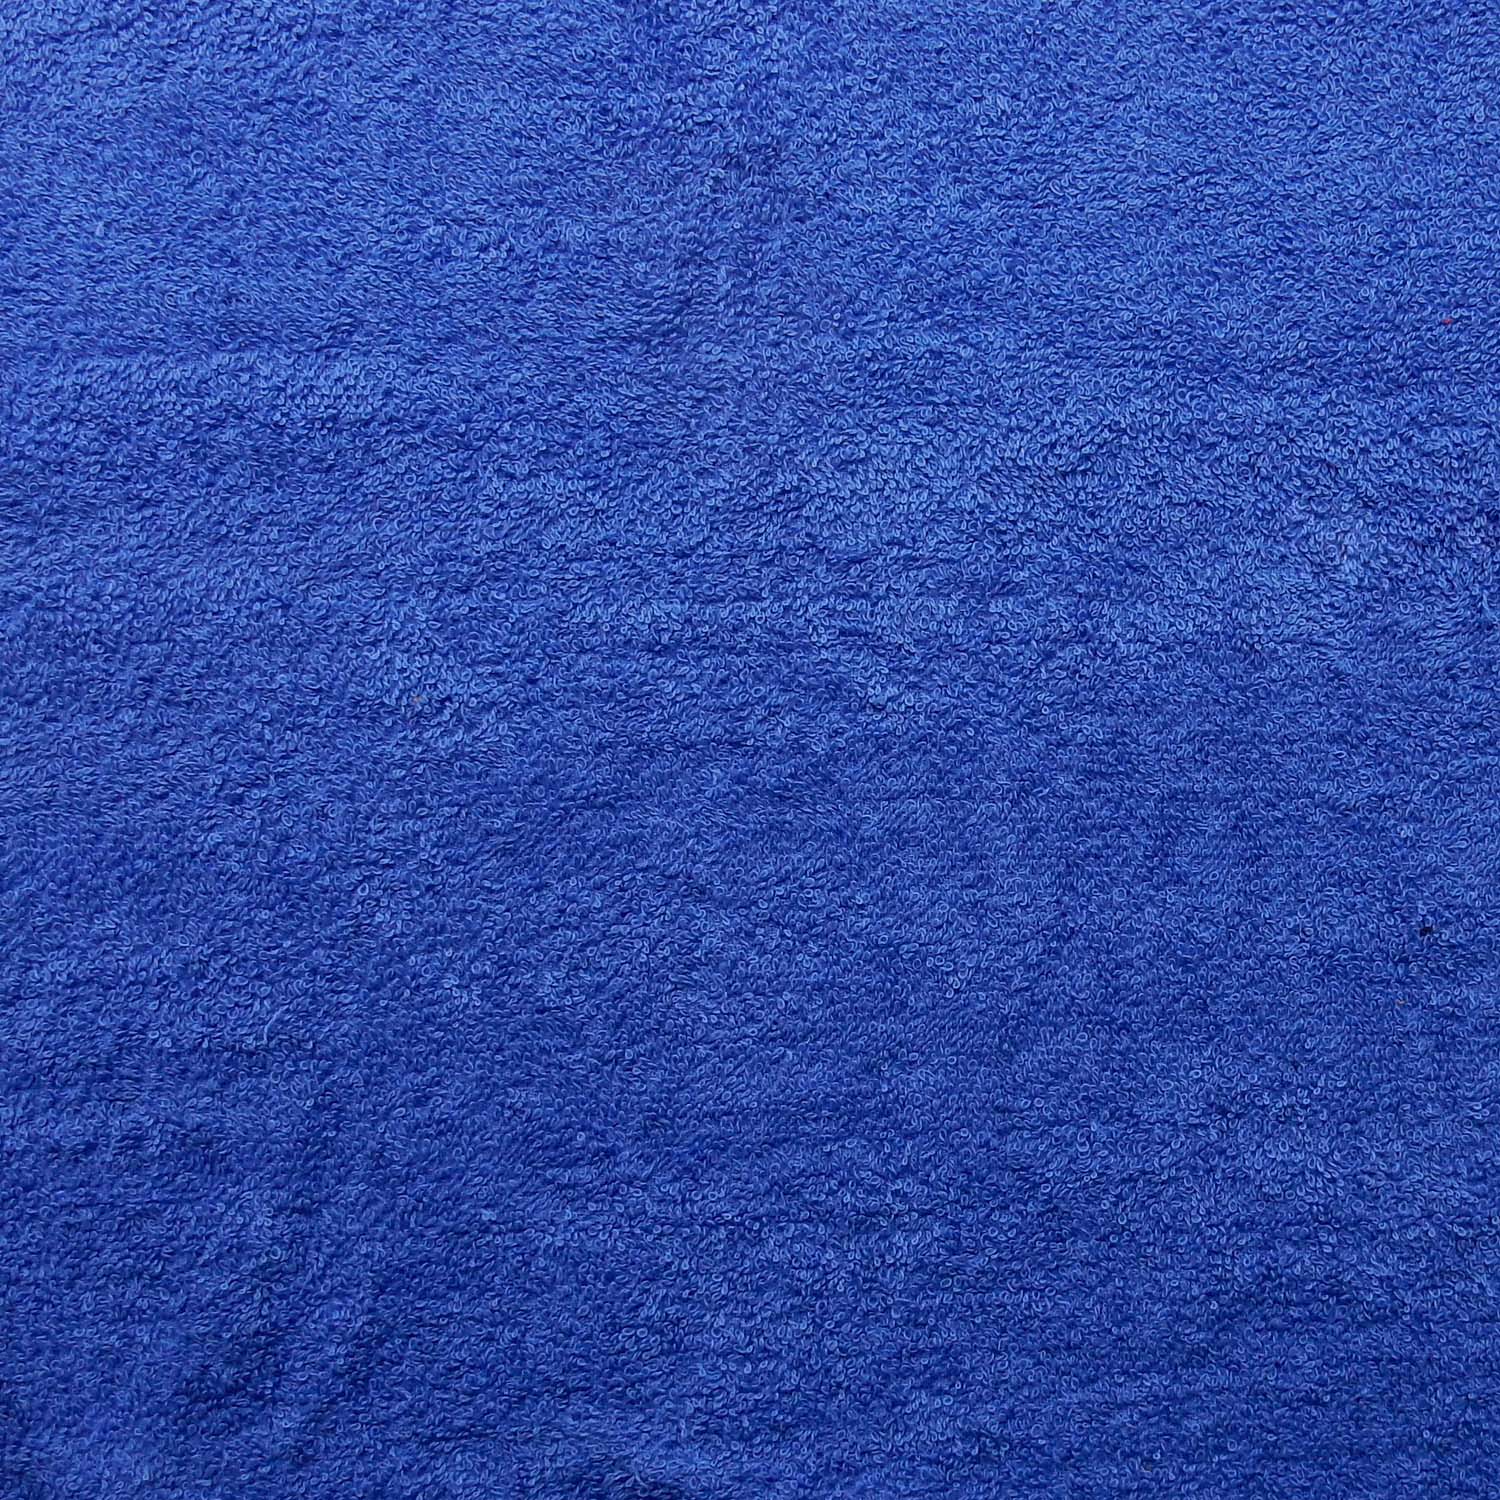 https://www.fabricdirect.com/wp-content/uploads/2020/06/terry-cloth-fabric-13oz-royal.jpg